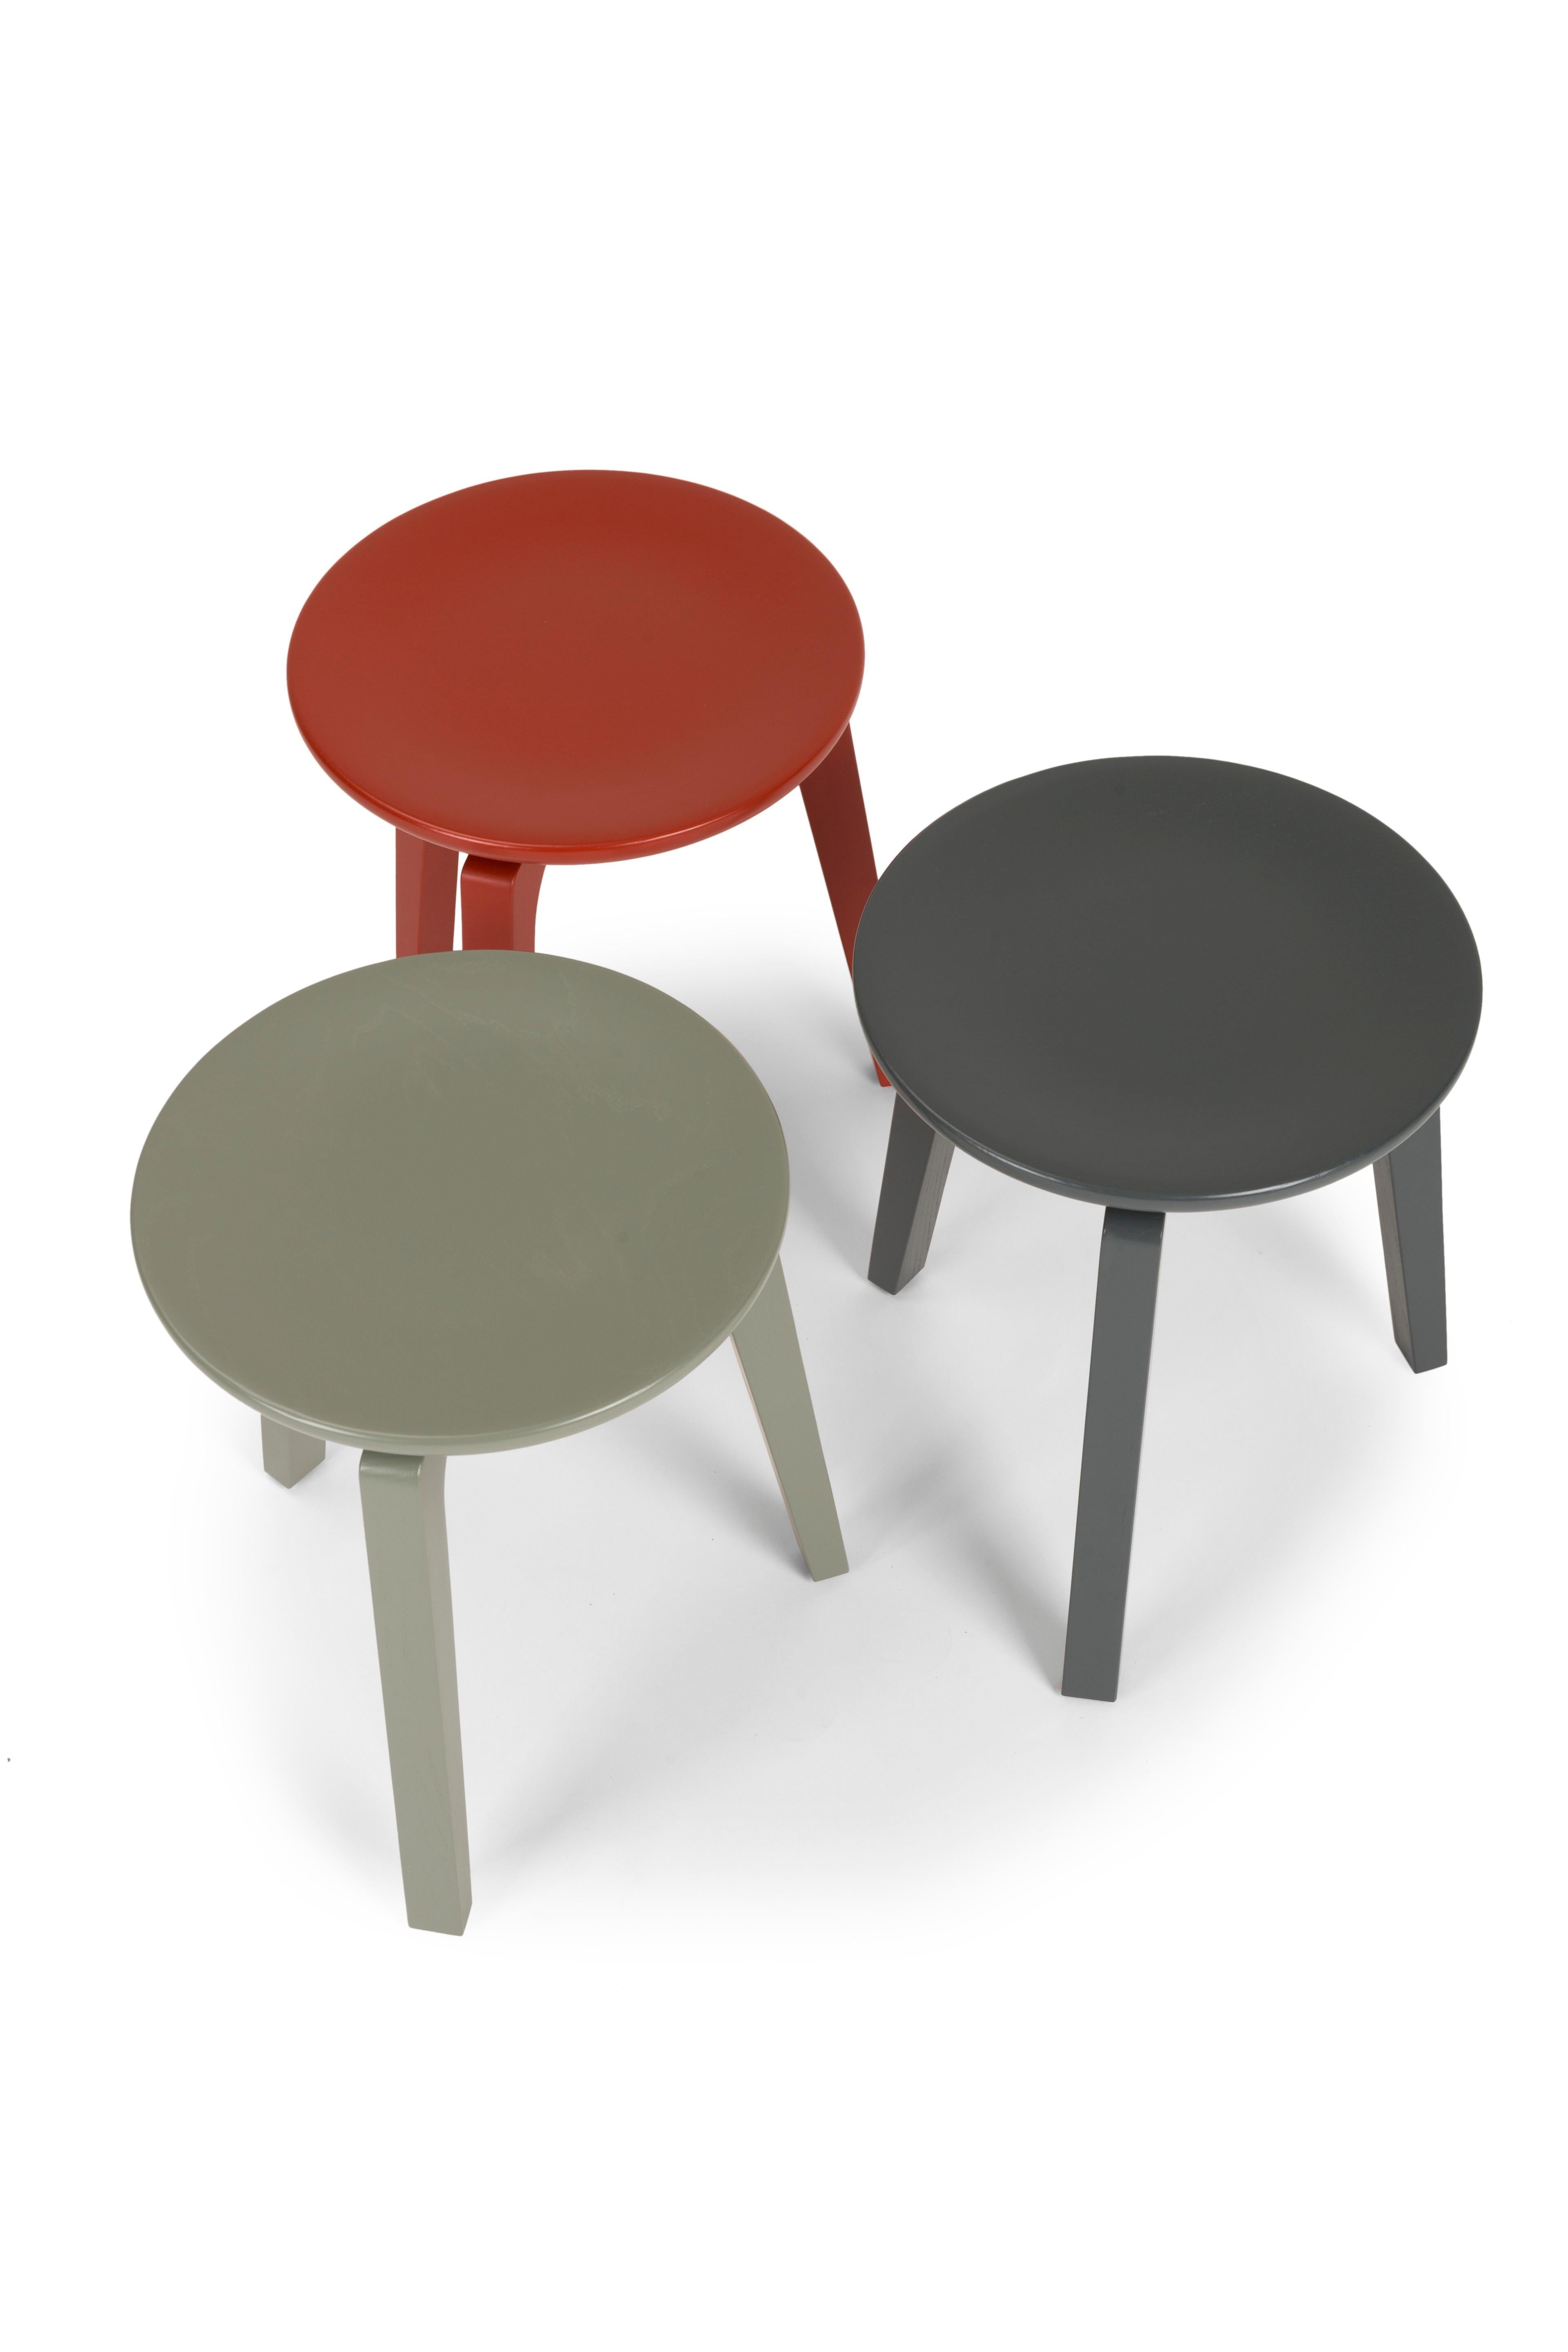 Inspired by the traditional work stools, TOD is available in two different heights.
Made of solid wood, it is proposed not only in natural oak or thermocooked wood, but also in a variety of colours with a glossy finish that make it a transversal